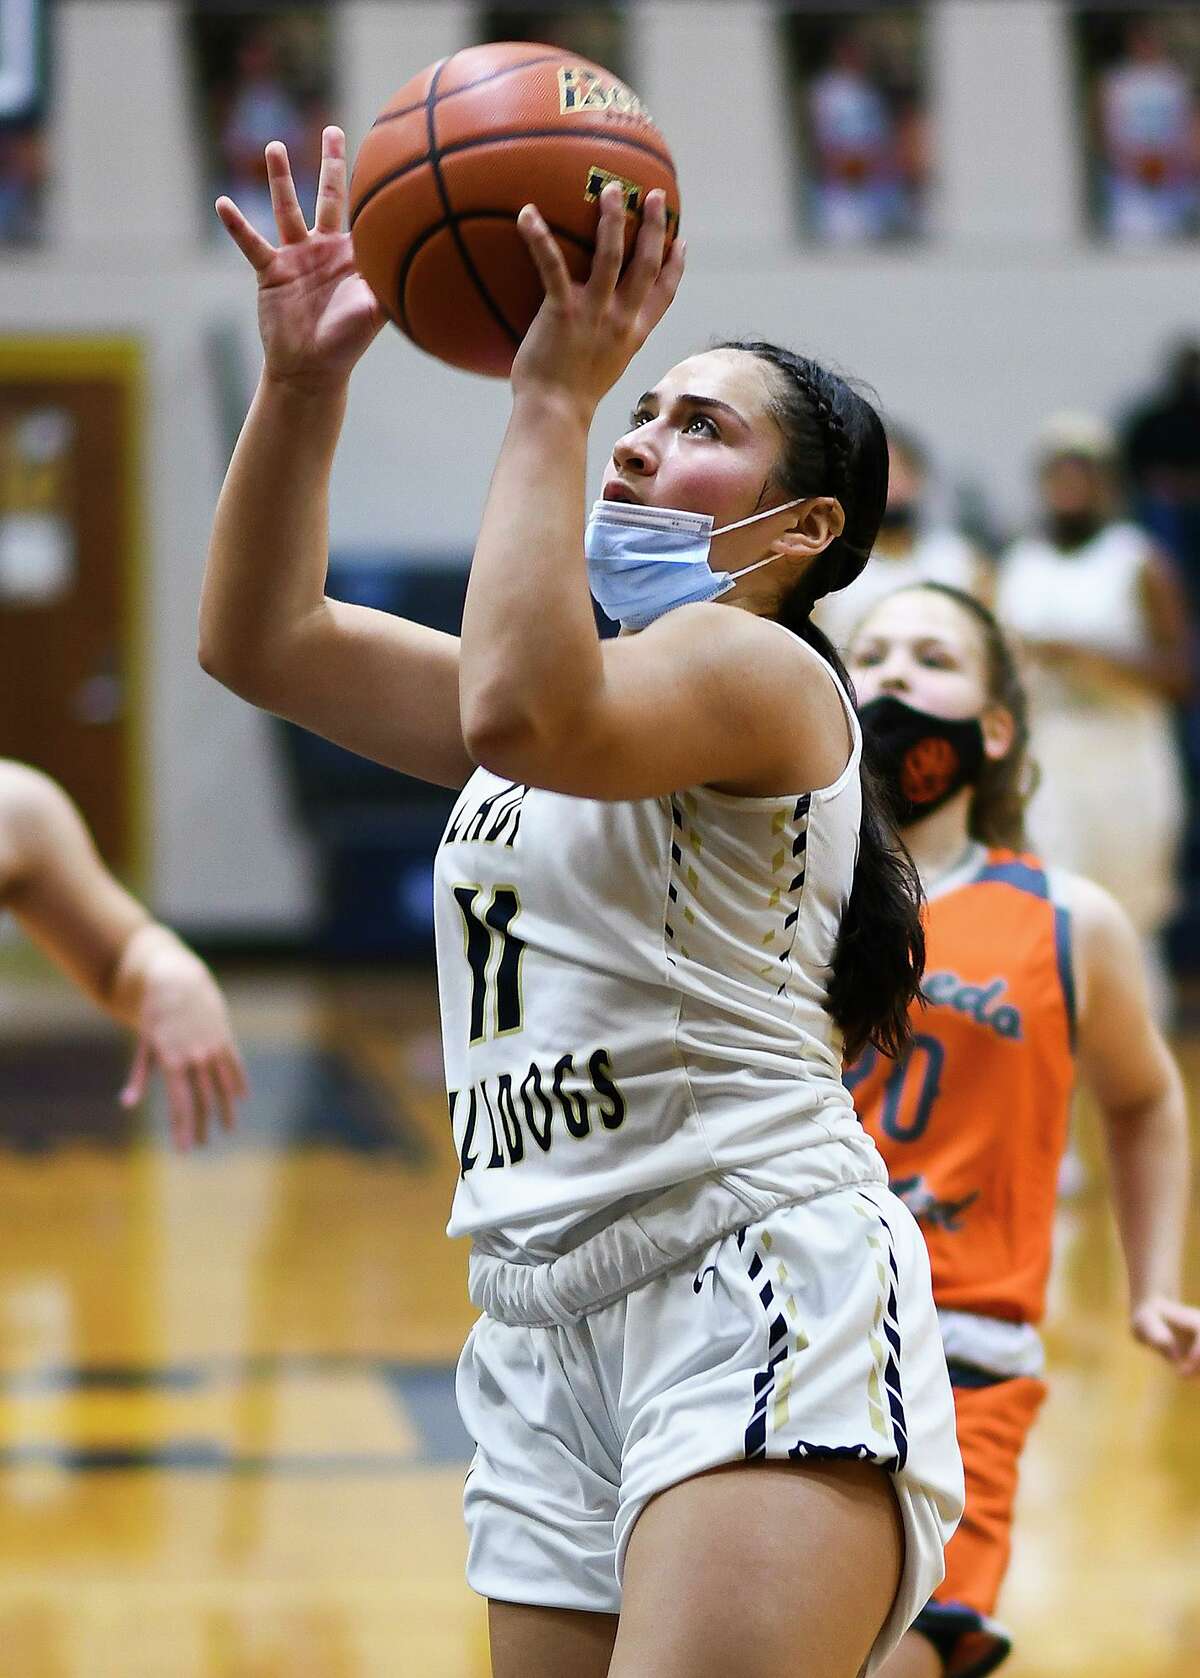 Alexander senior-to-be Kayla Herrera aims to play college basketball after her high school career is over.